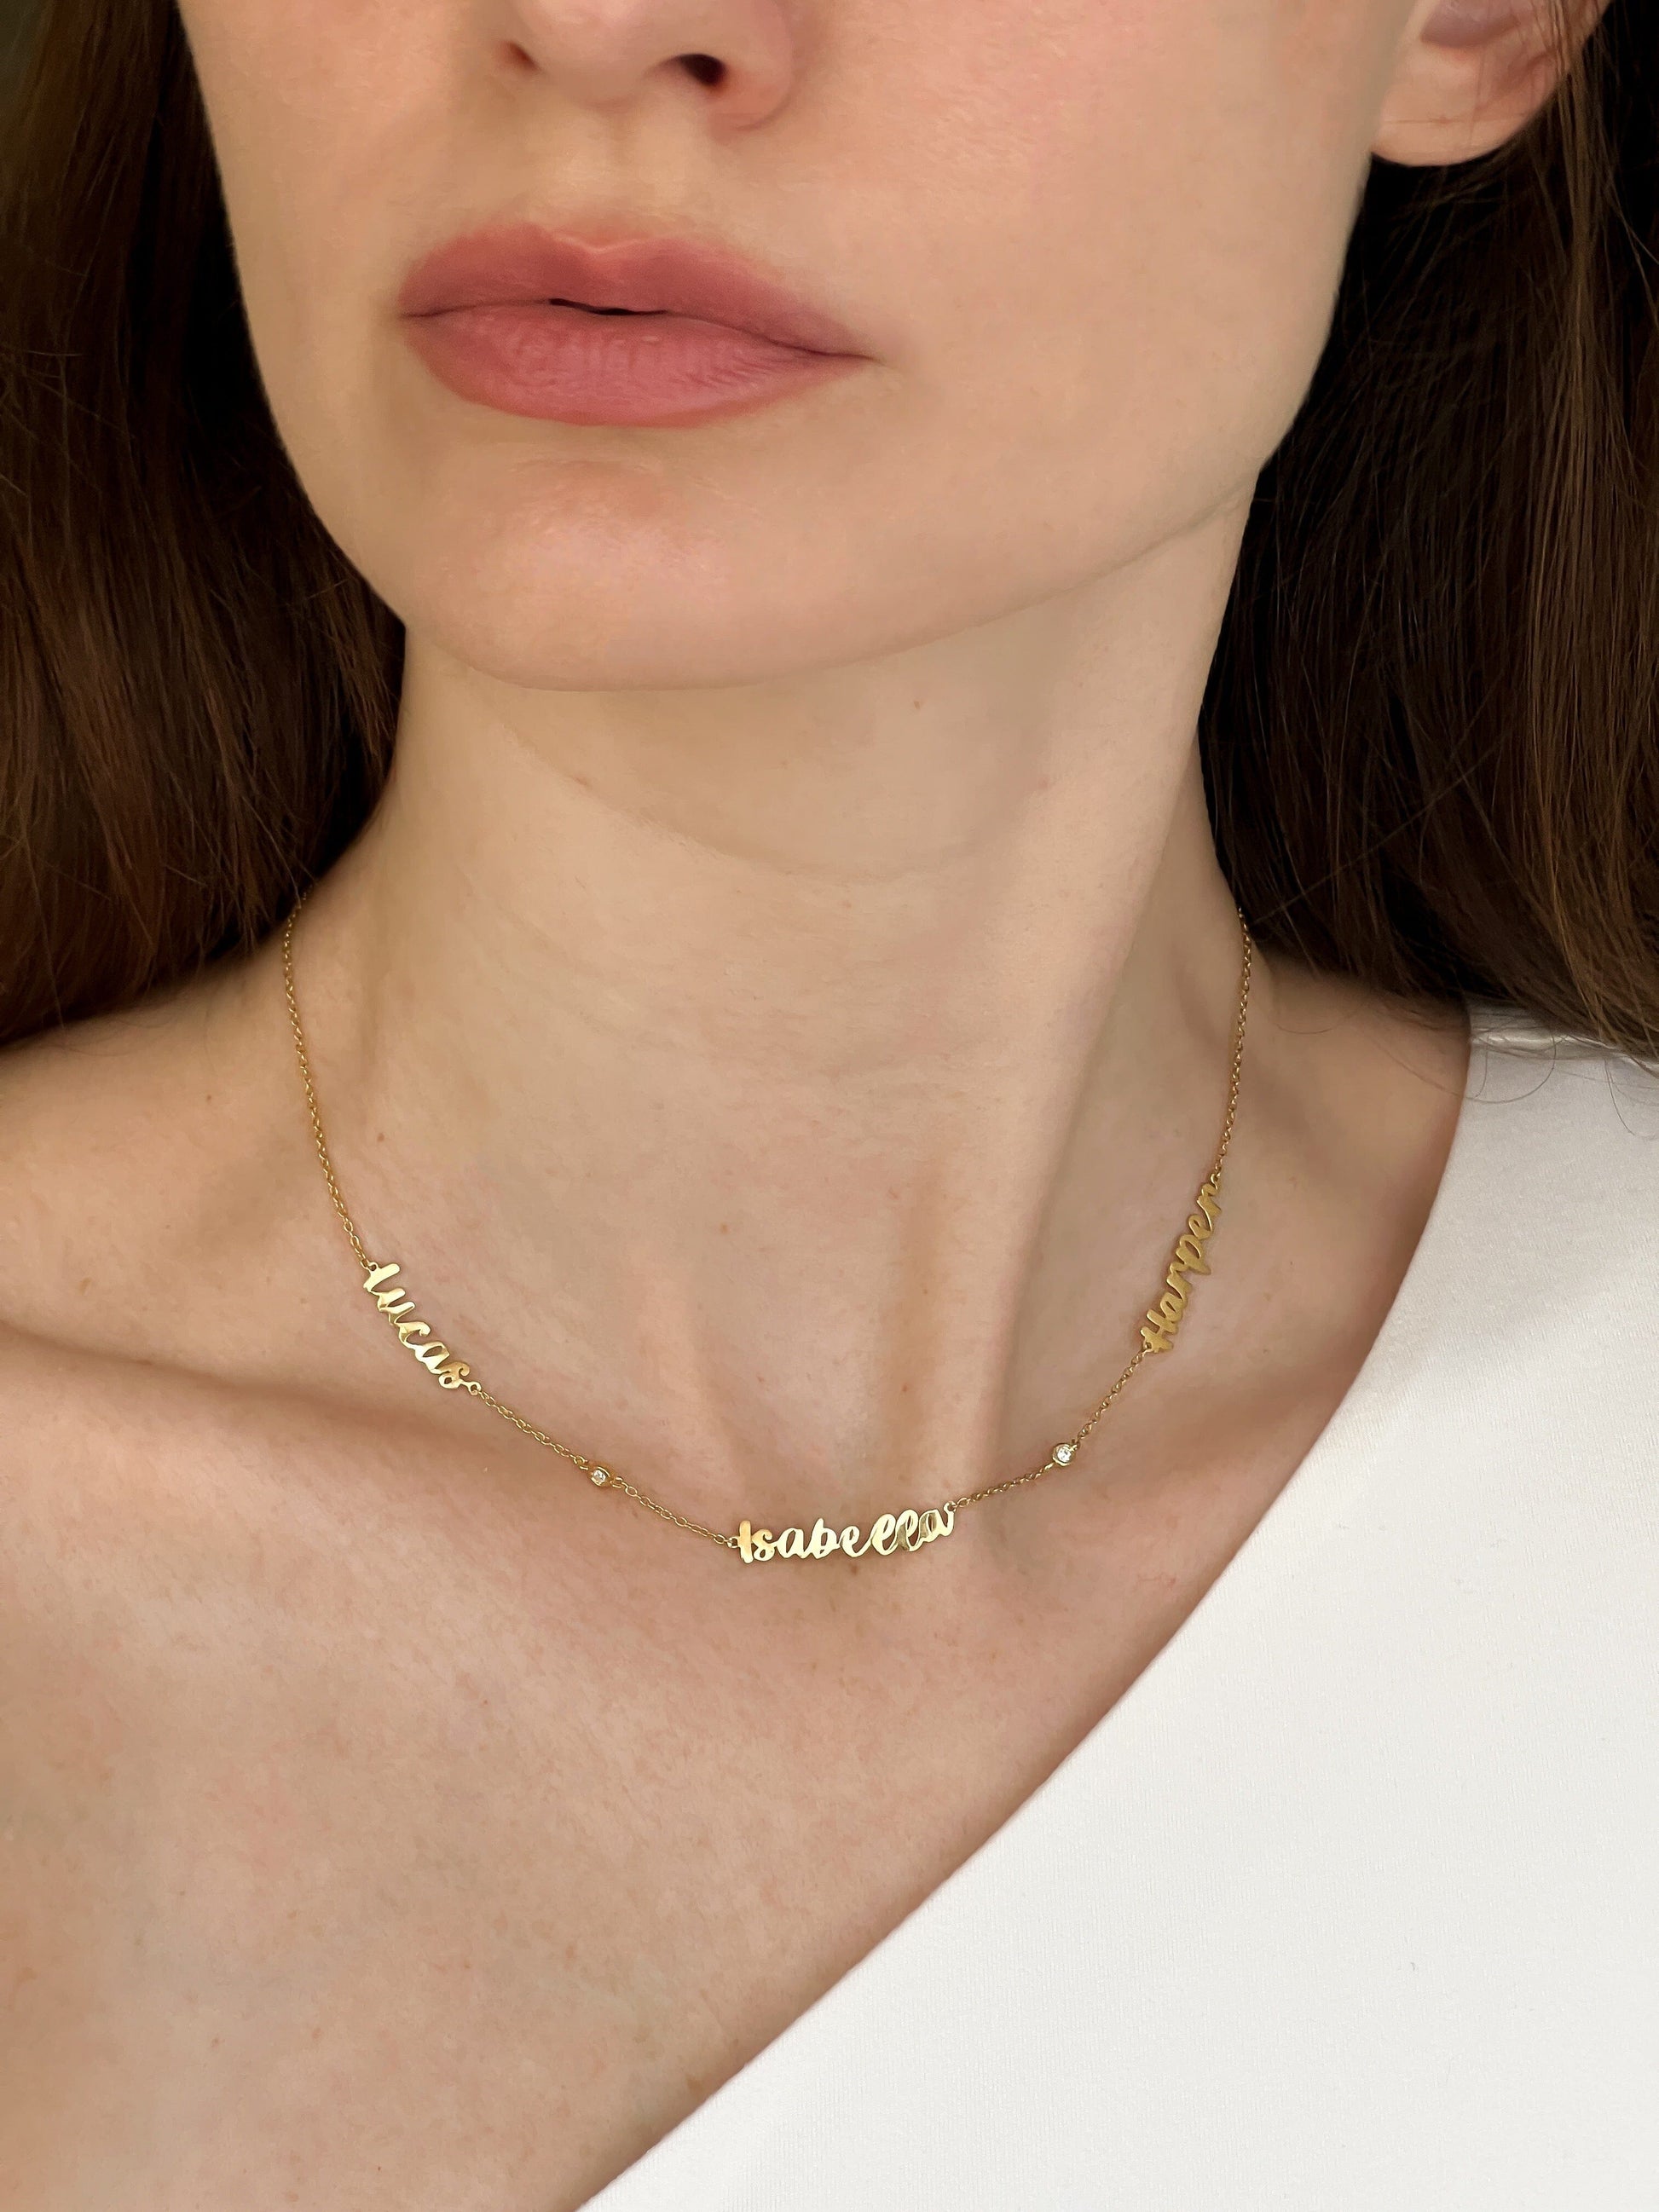 Name Necklace with Diamonds - 18K Rose Vermeil Necklaces magal-dev 